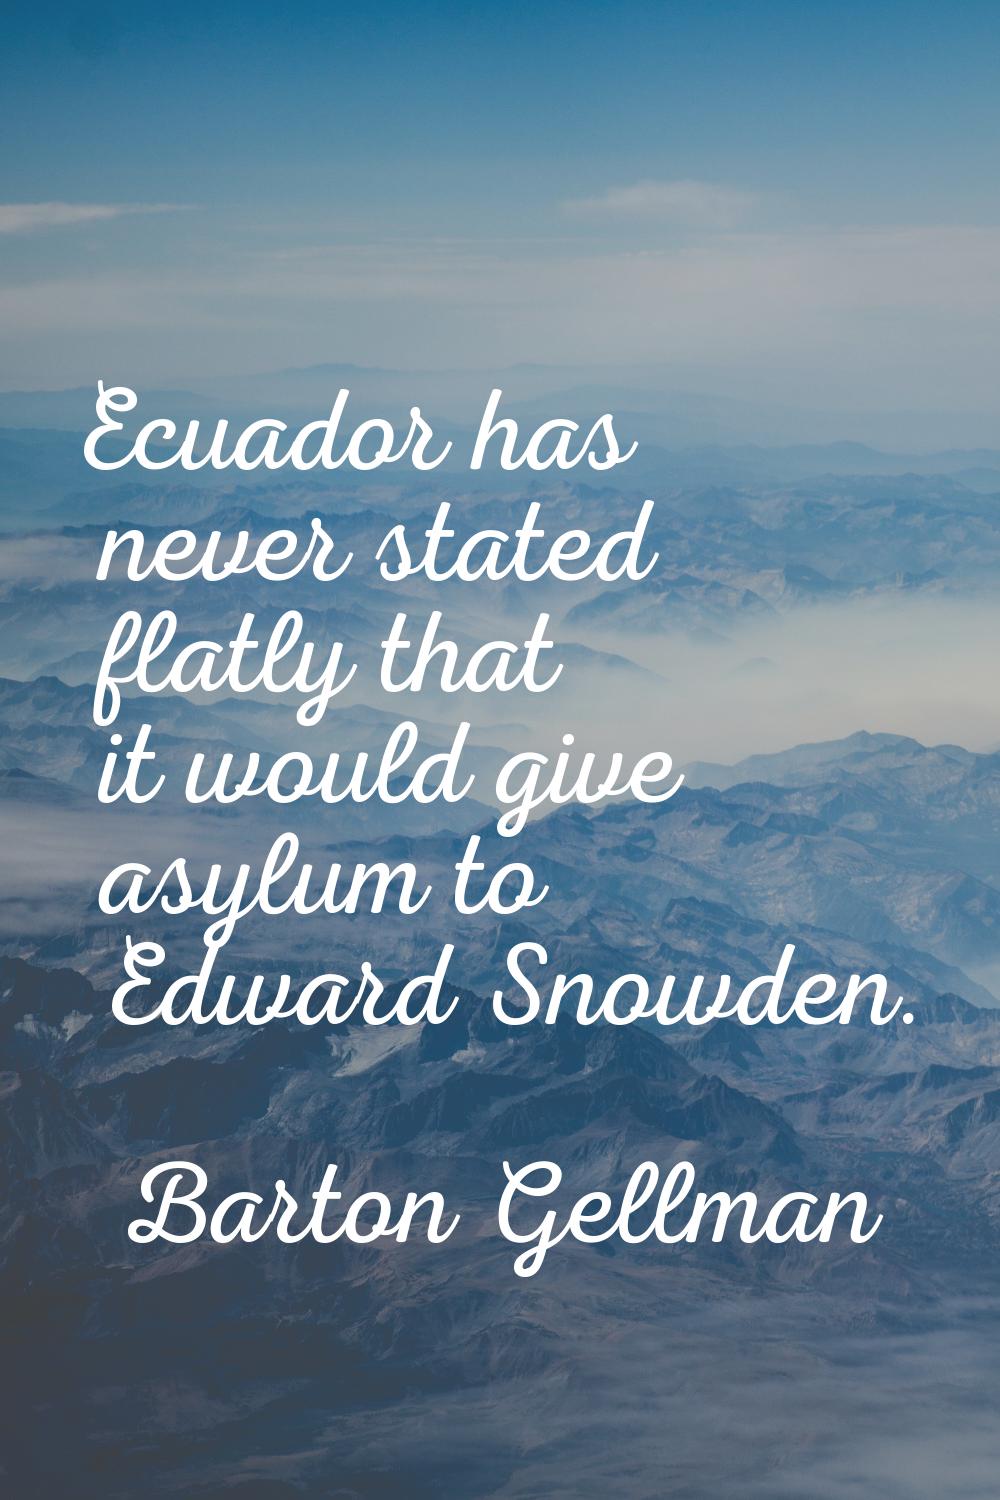 Ecuador has never stated flatly that it would give asylum to Edward Snowden.